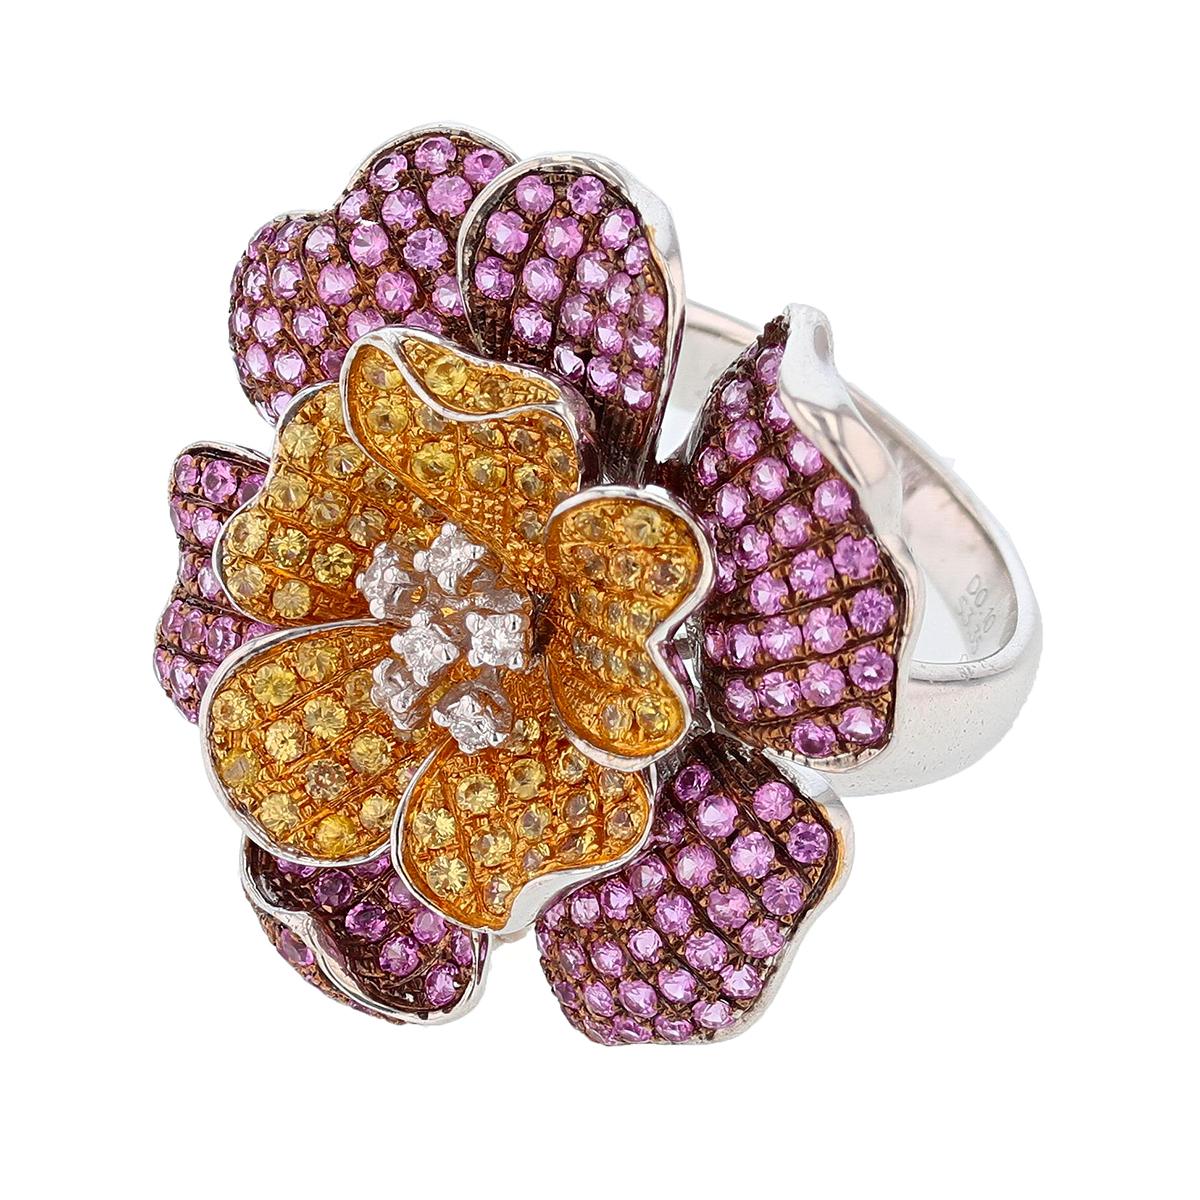 This ring is made in 18k white gold. The ring features 242 round brilliant cut Yellow Sapphire and Pink Sapphire weighing 3.30ct and 6 round cut diamonds weighing 0.10ct.